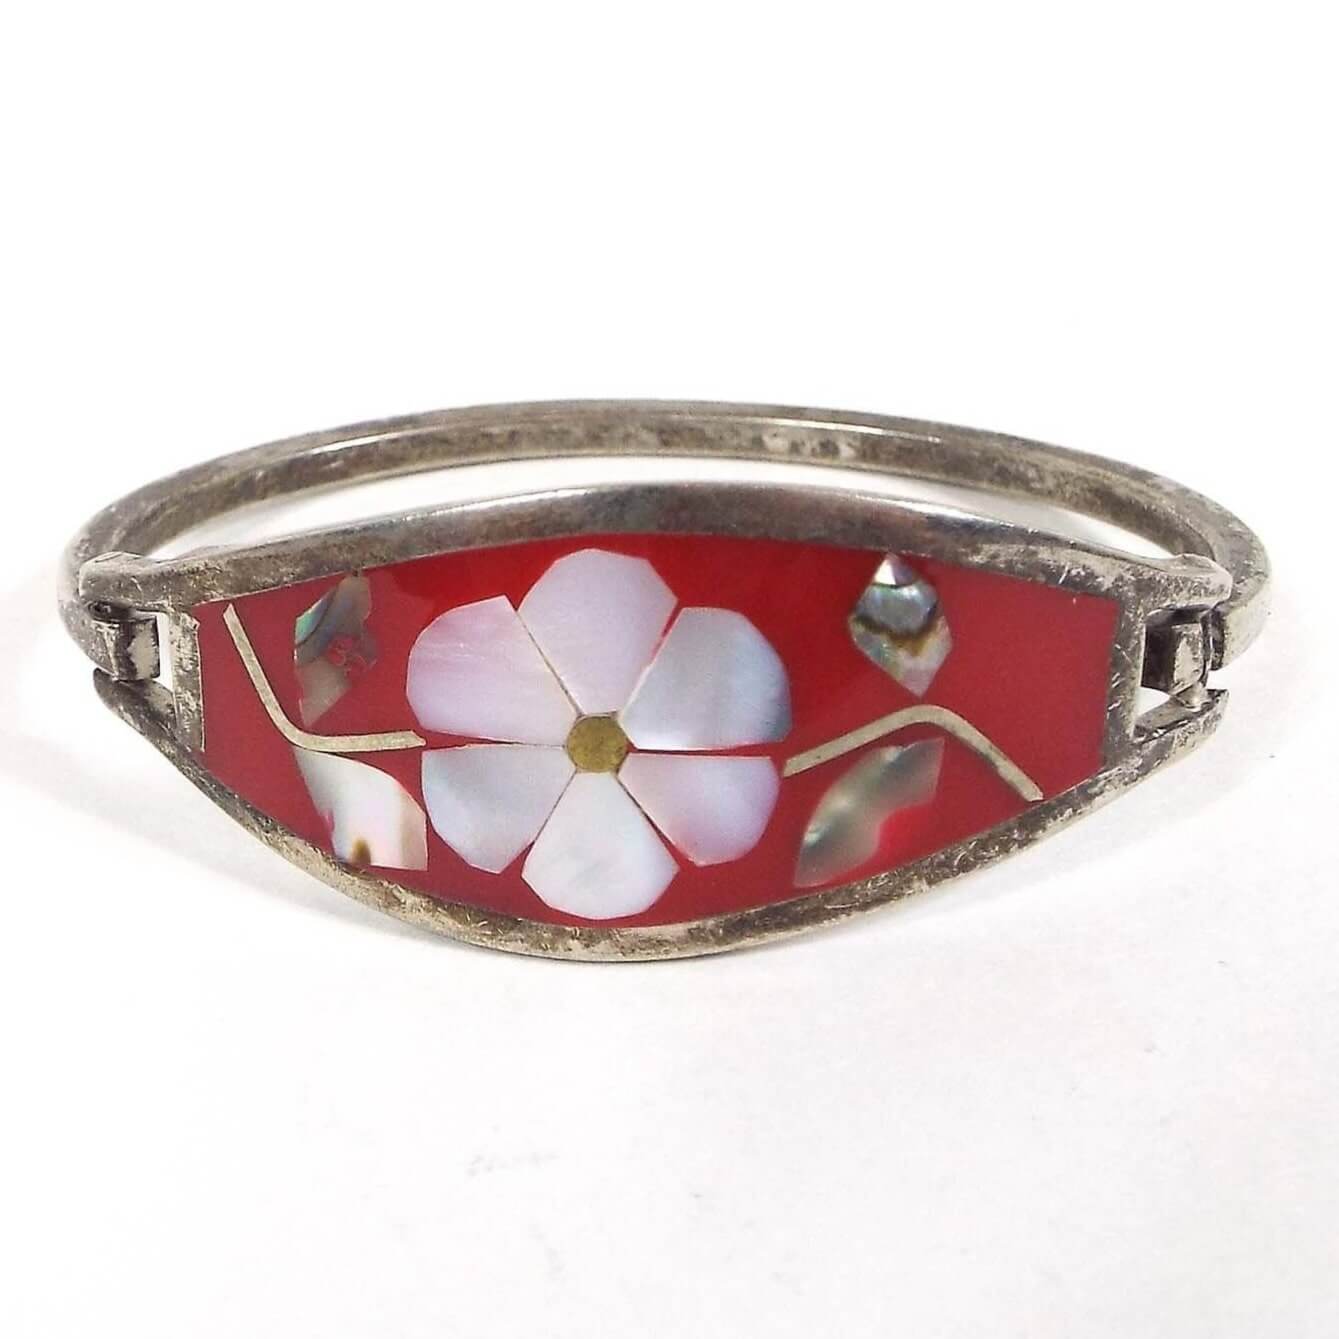 Front view of the Mexican Alpaca hinged bangle has two bands of metal and a large area in the middle with tapered ends. It has red resin with a flower design in the middle.Flower petals are mother of pearl shell and pearly white in color. Leaves on each side of the flower are abalone shell and are pearly multi color. There is a thin band of metal curved around the back and one side has a hook that clicks onto one side of the bangle to take it on and off. Metal is a darkened silver color from age.